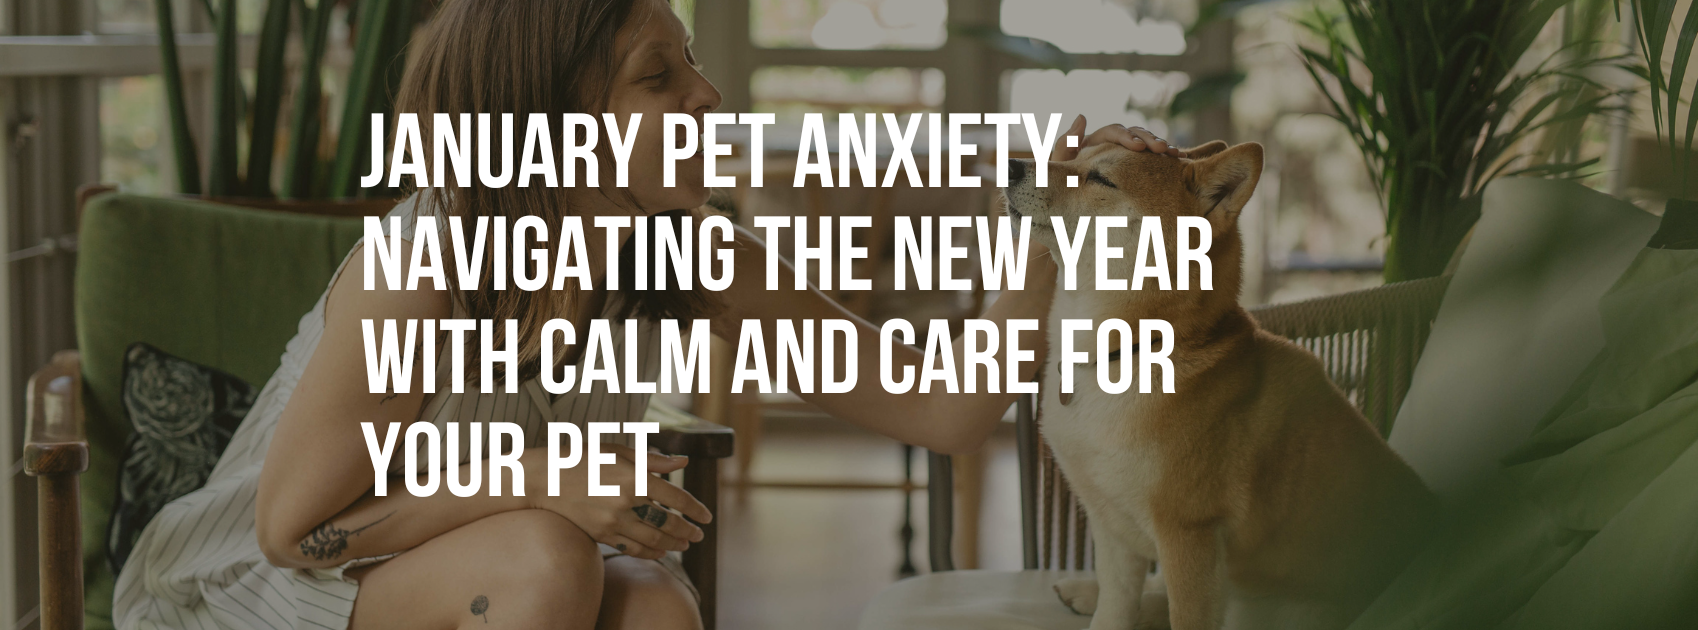 January Pet Anxiety: Navigating the New Year with Calm and Care for Your Pet